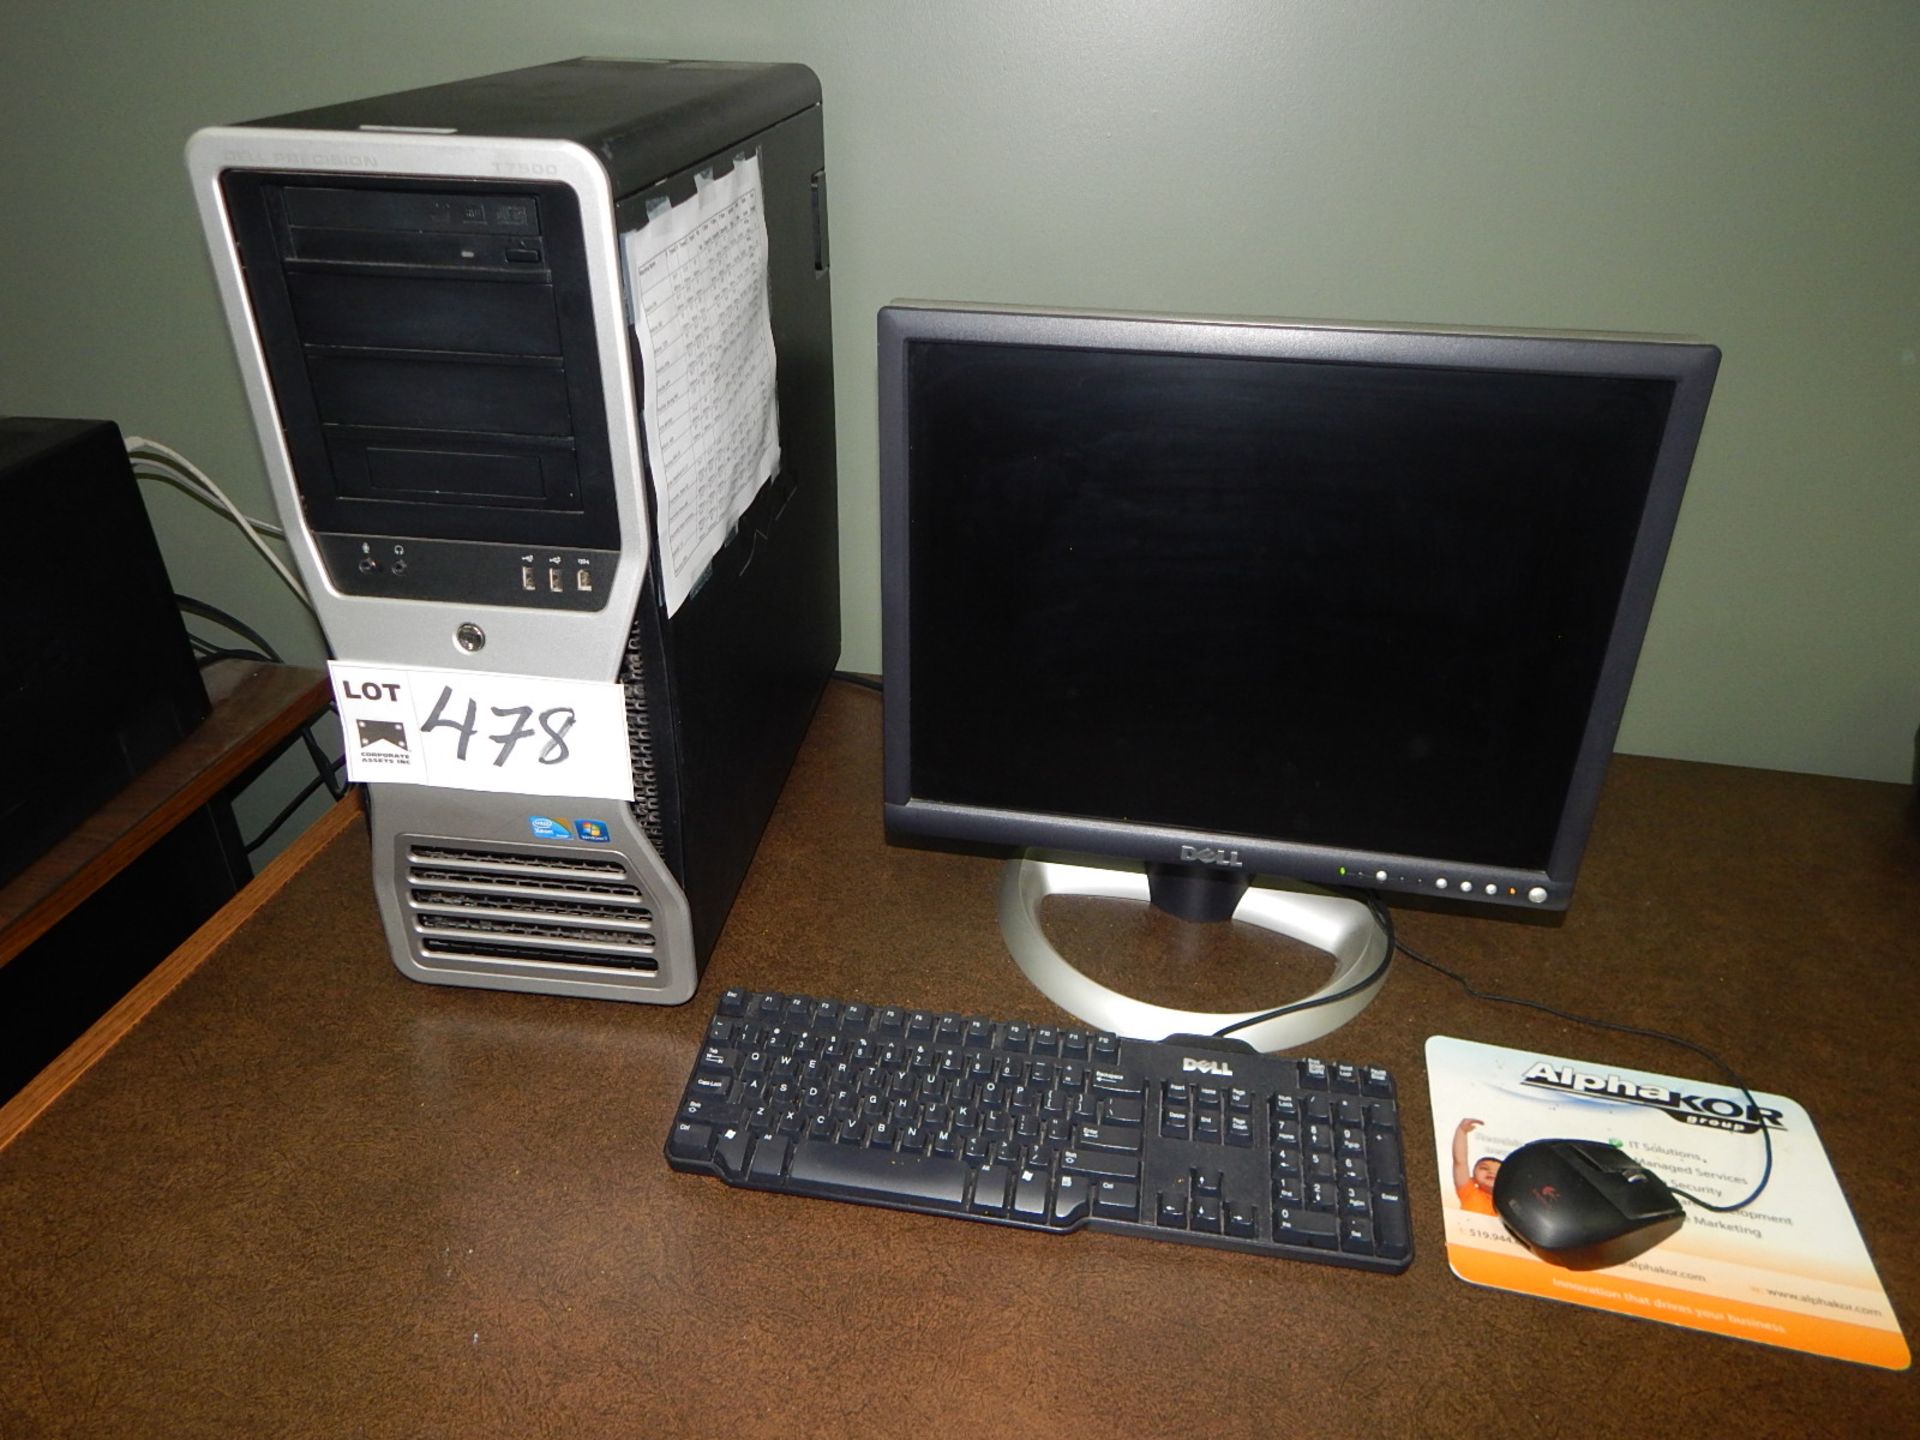 LOT/ DELL PRECISION T7500 DESKTOP COMPUTER WITH MONITOR, KEYBOARD, MOUSE AND APC BATTERY BACKUP